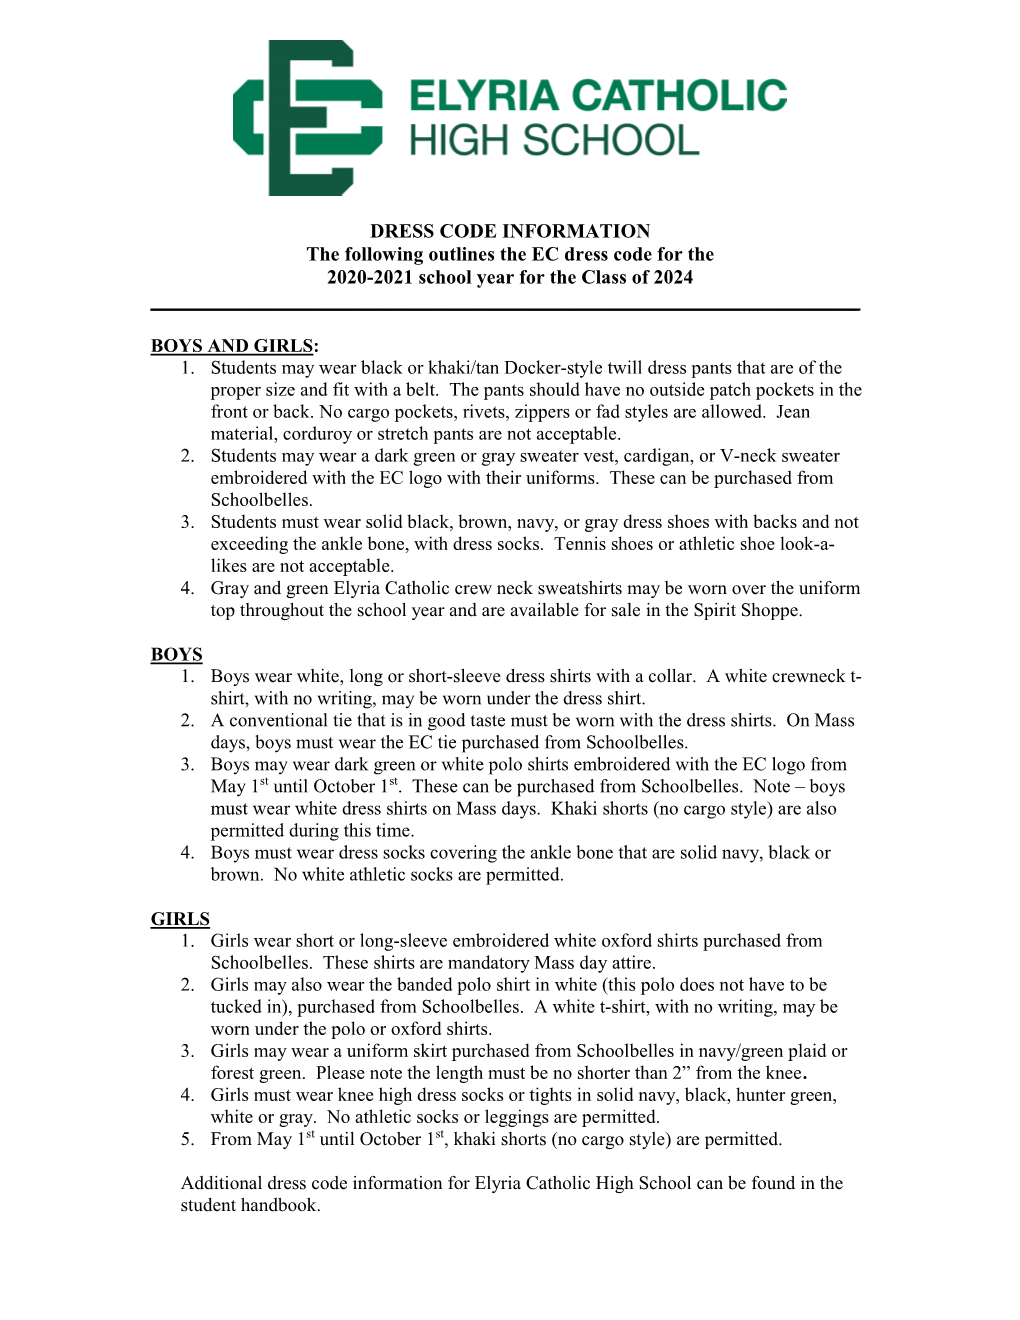 DRESS CODE INFORMATION the Following Outlines the EC Dress Code for the 2020-2021 School Year for the Class of 2024 ______